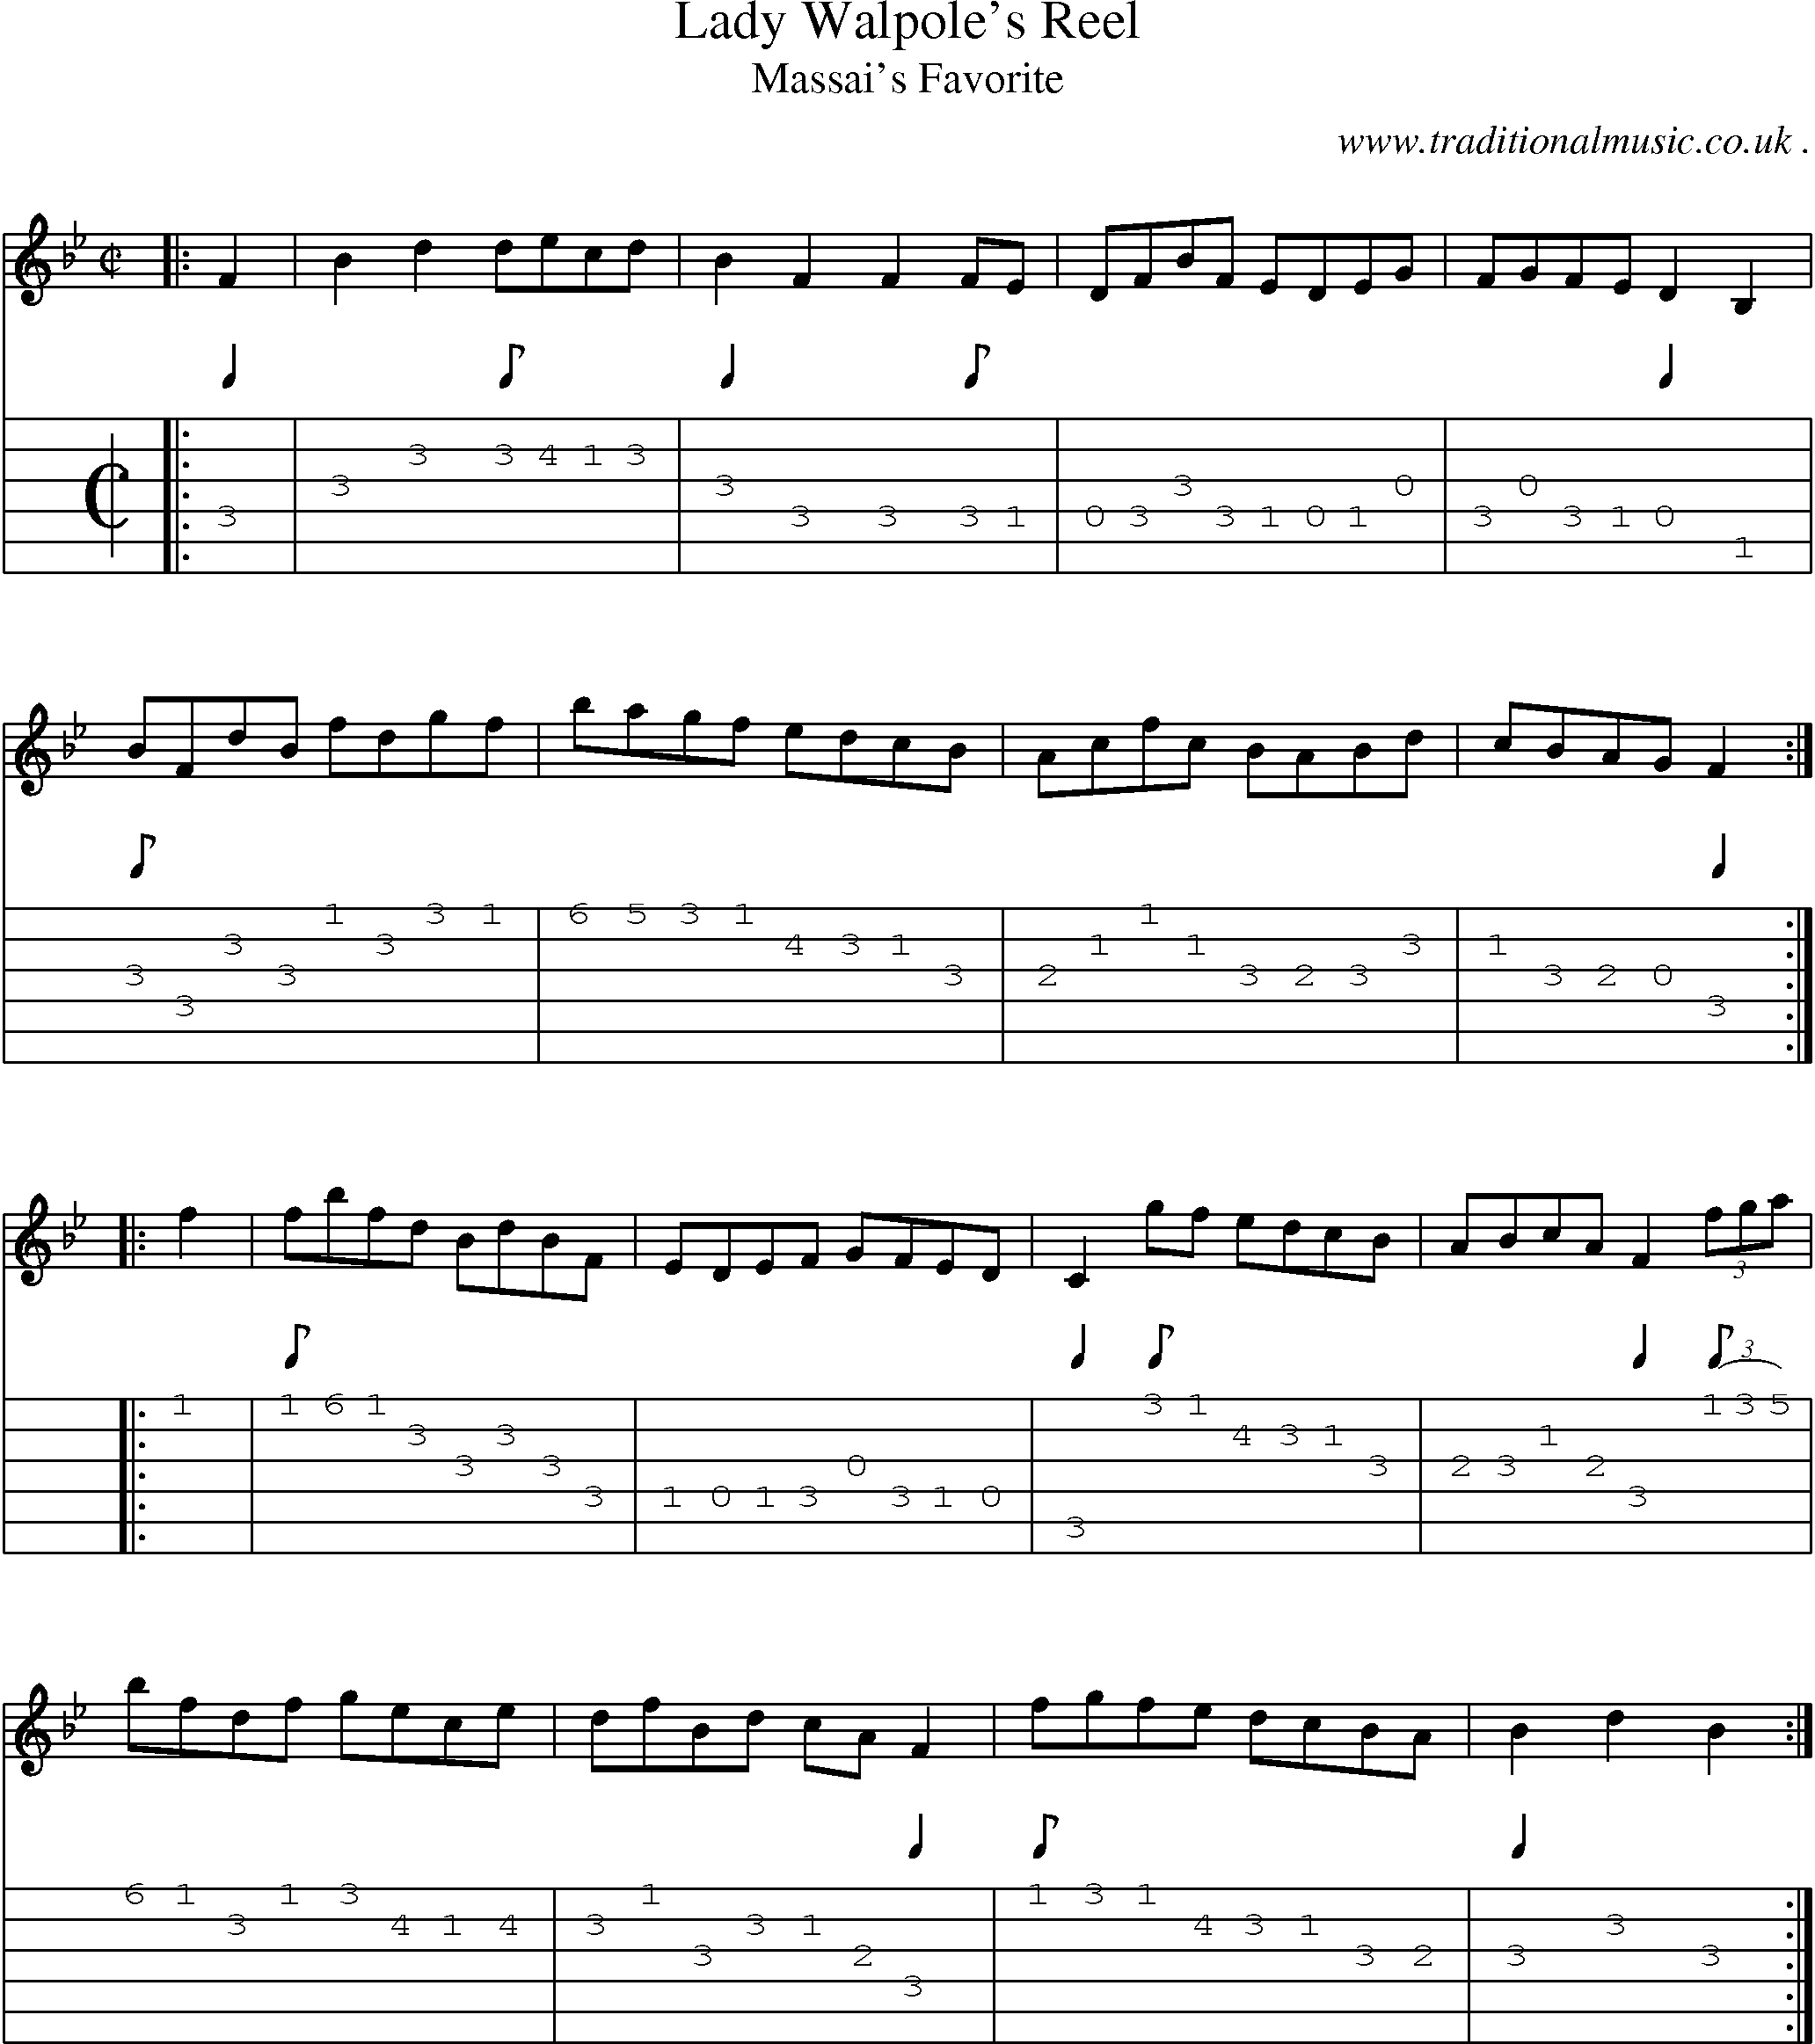 Sheet-Music and Guitar Tabs for Lady Walpoles Reel